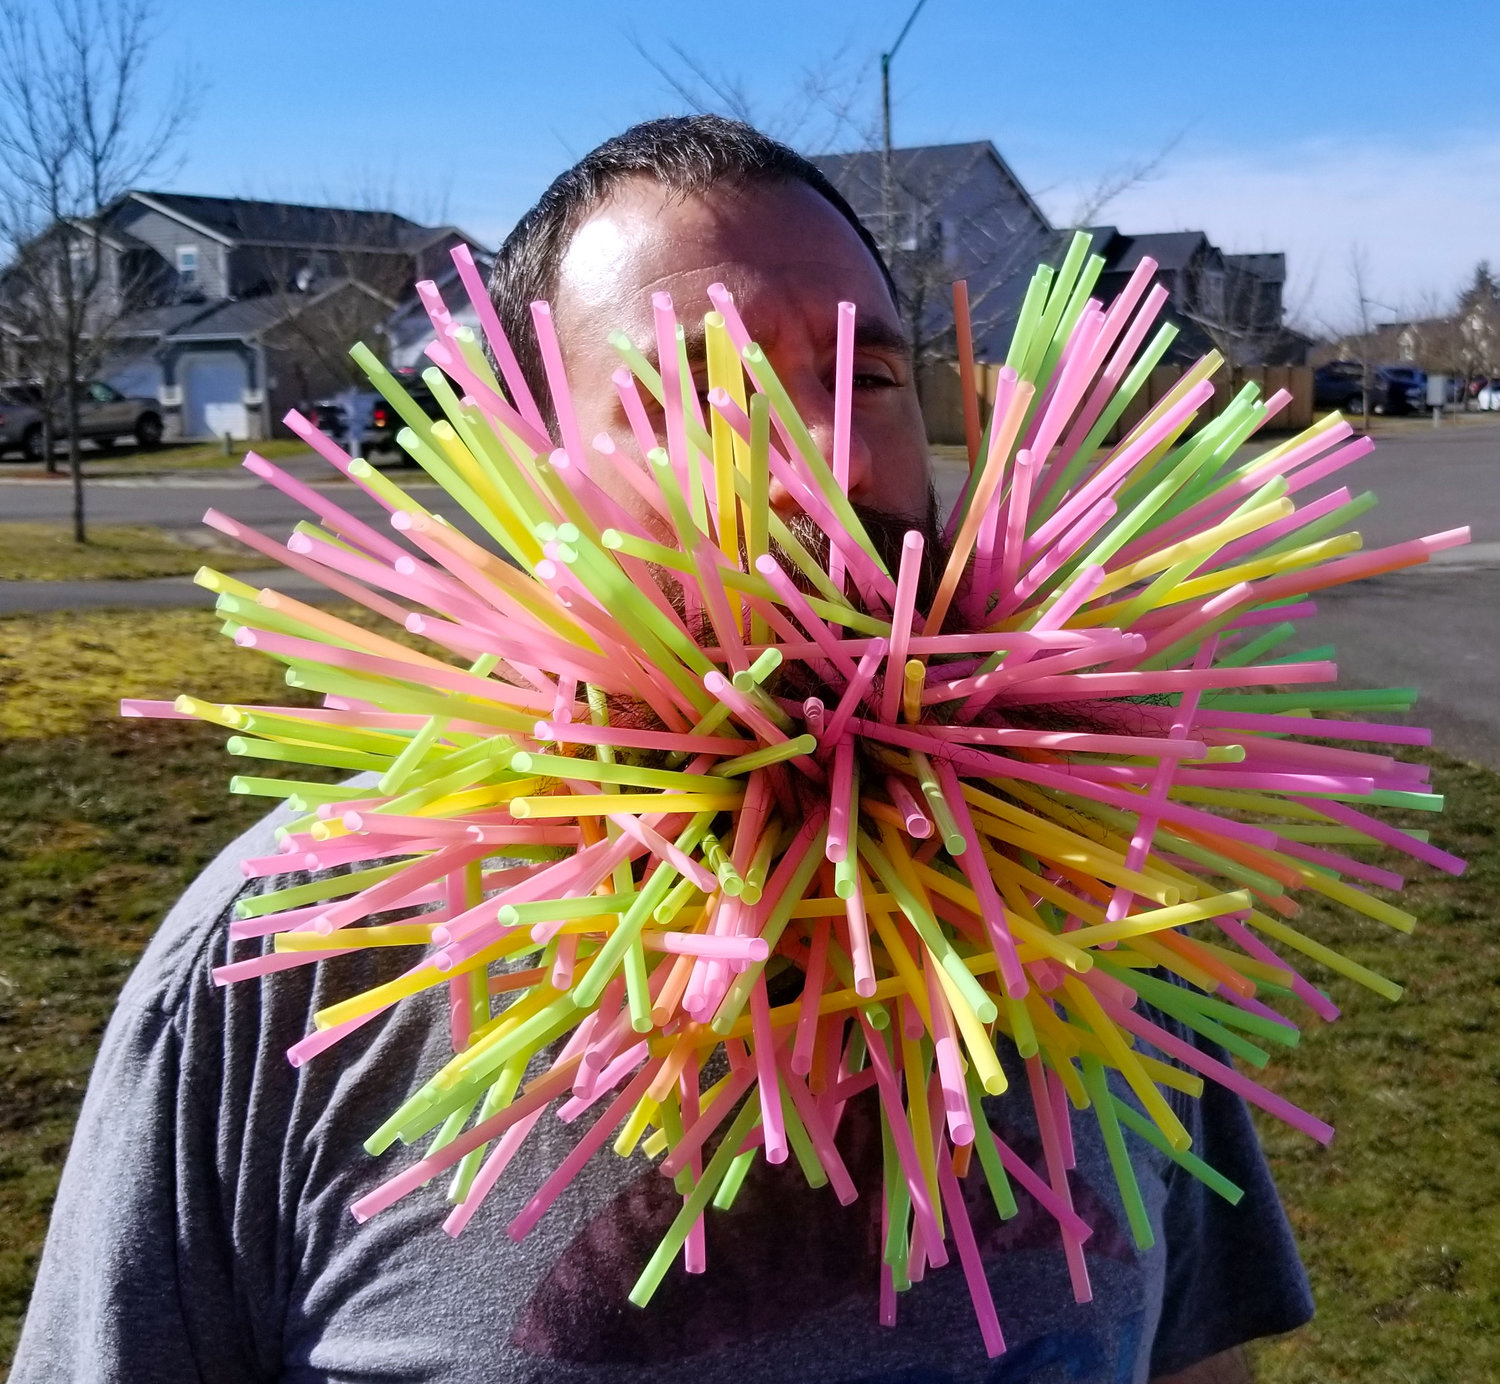 Joel Strasser holds  the world record for the amount of plastic straws one can place in their beard.